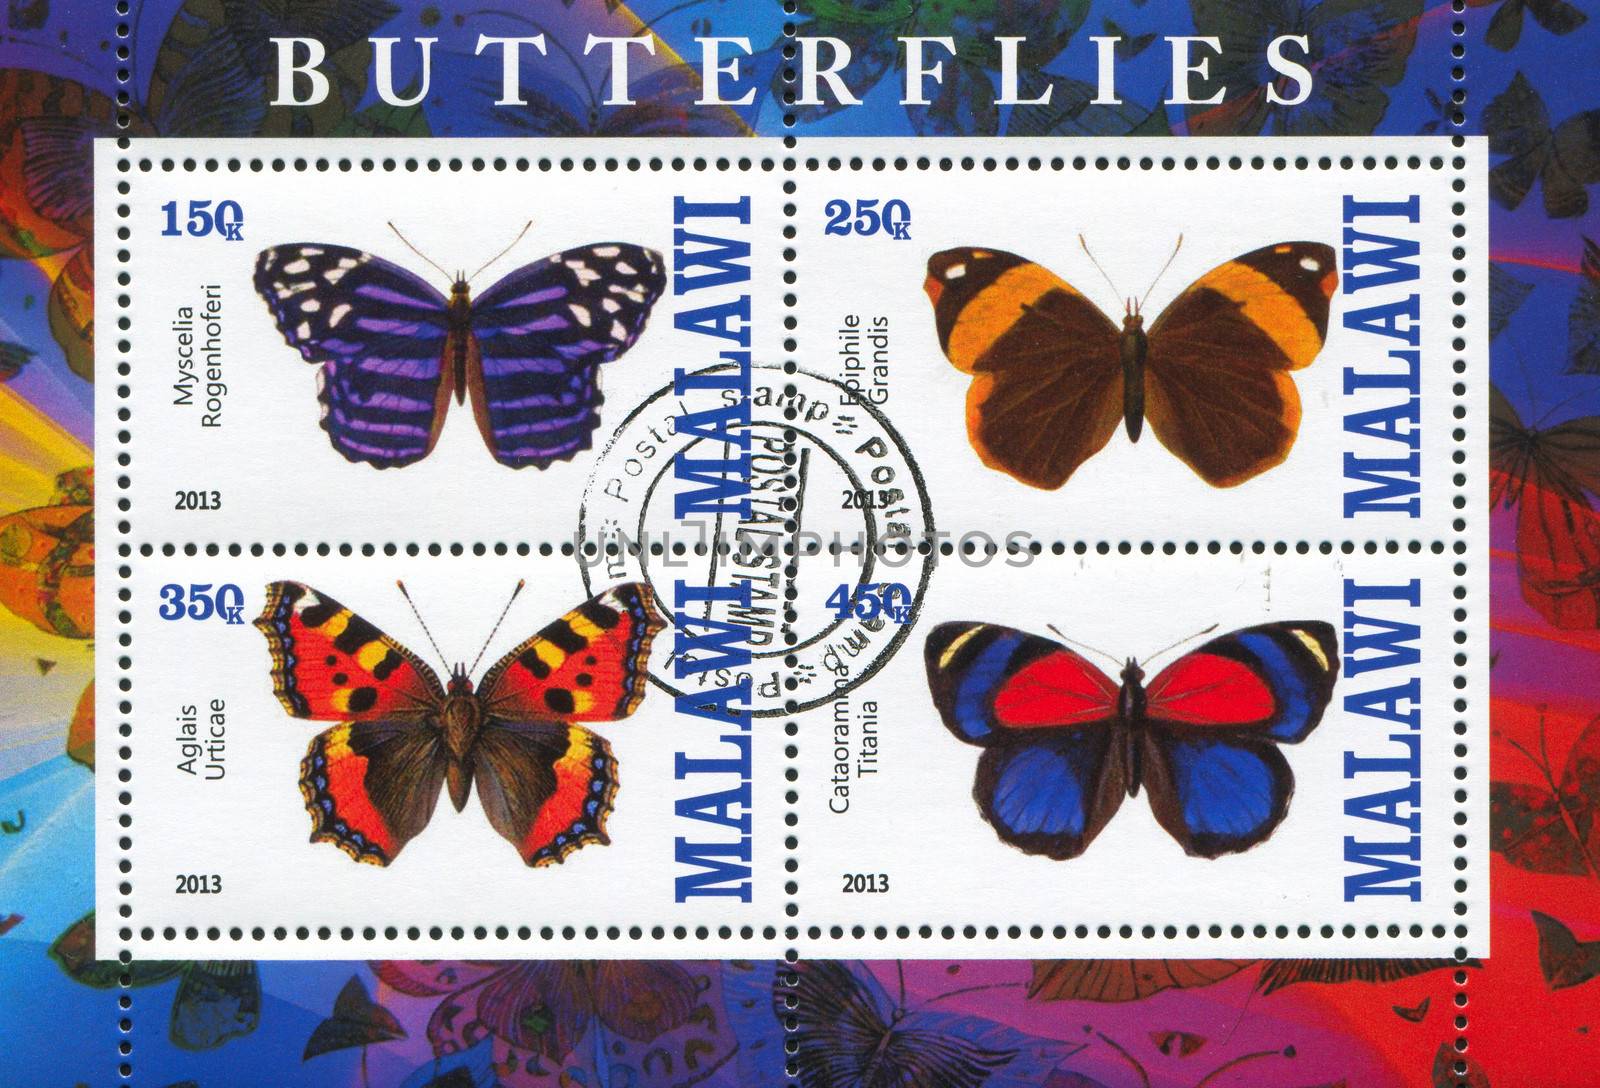 MALAWI - CIRCA 2013: stamp printed by Malawi, shows butterfly, circa 2013